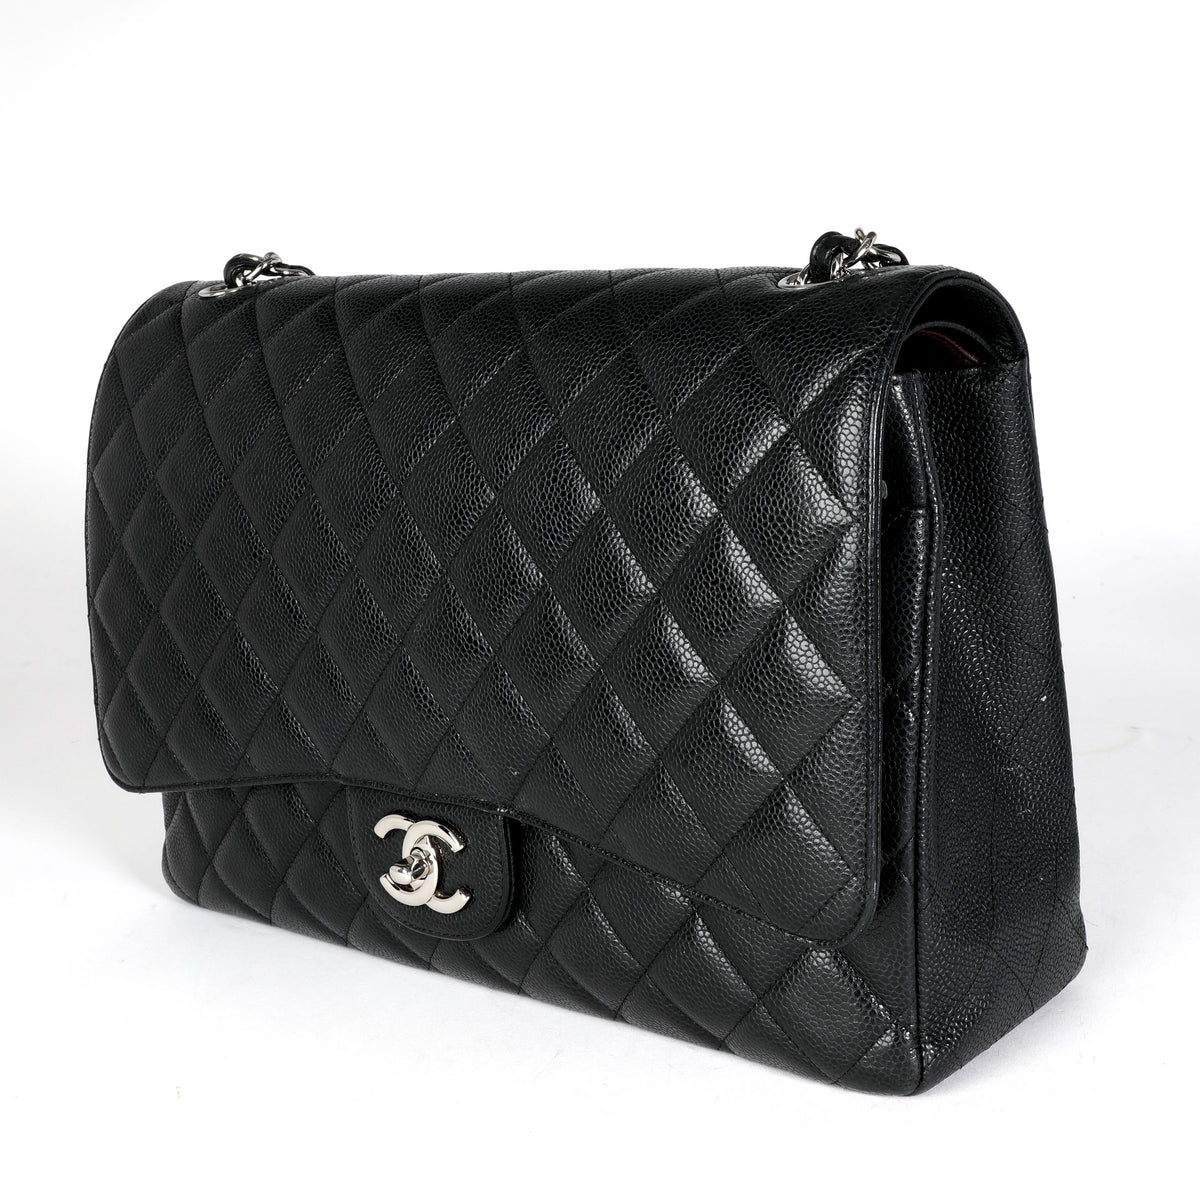 Chanel Black Quilted Caviar Maxi Classic Double Flap Bag, myGemma, SG